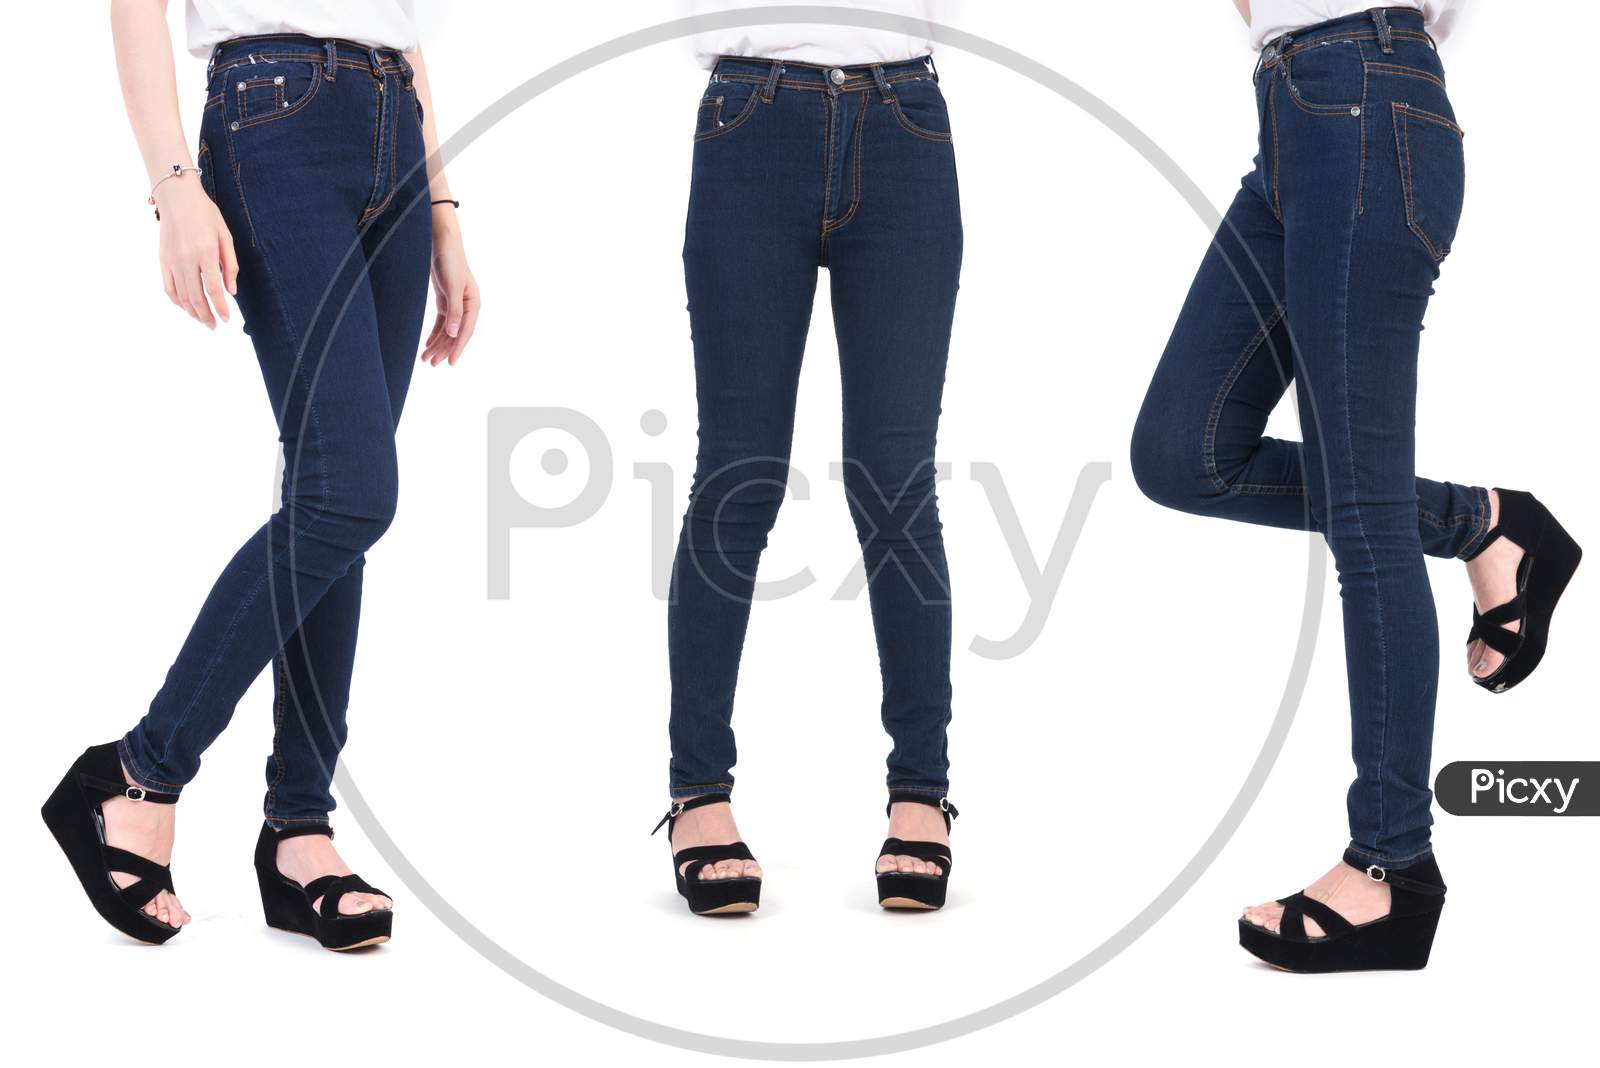 Close Up Lower Body Of Beauty Woman With Fashion Jeans And Shoes. Trendy And New Fashion Concept. Isolated White Background. Studio Portrait.